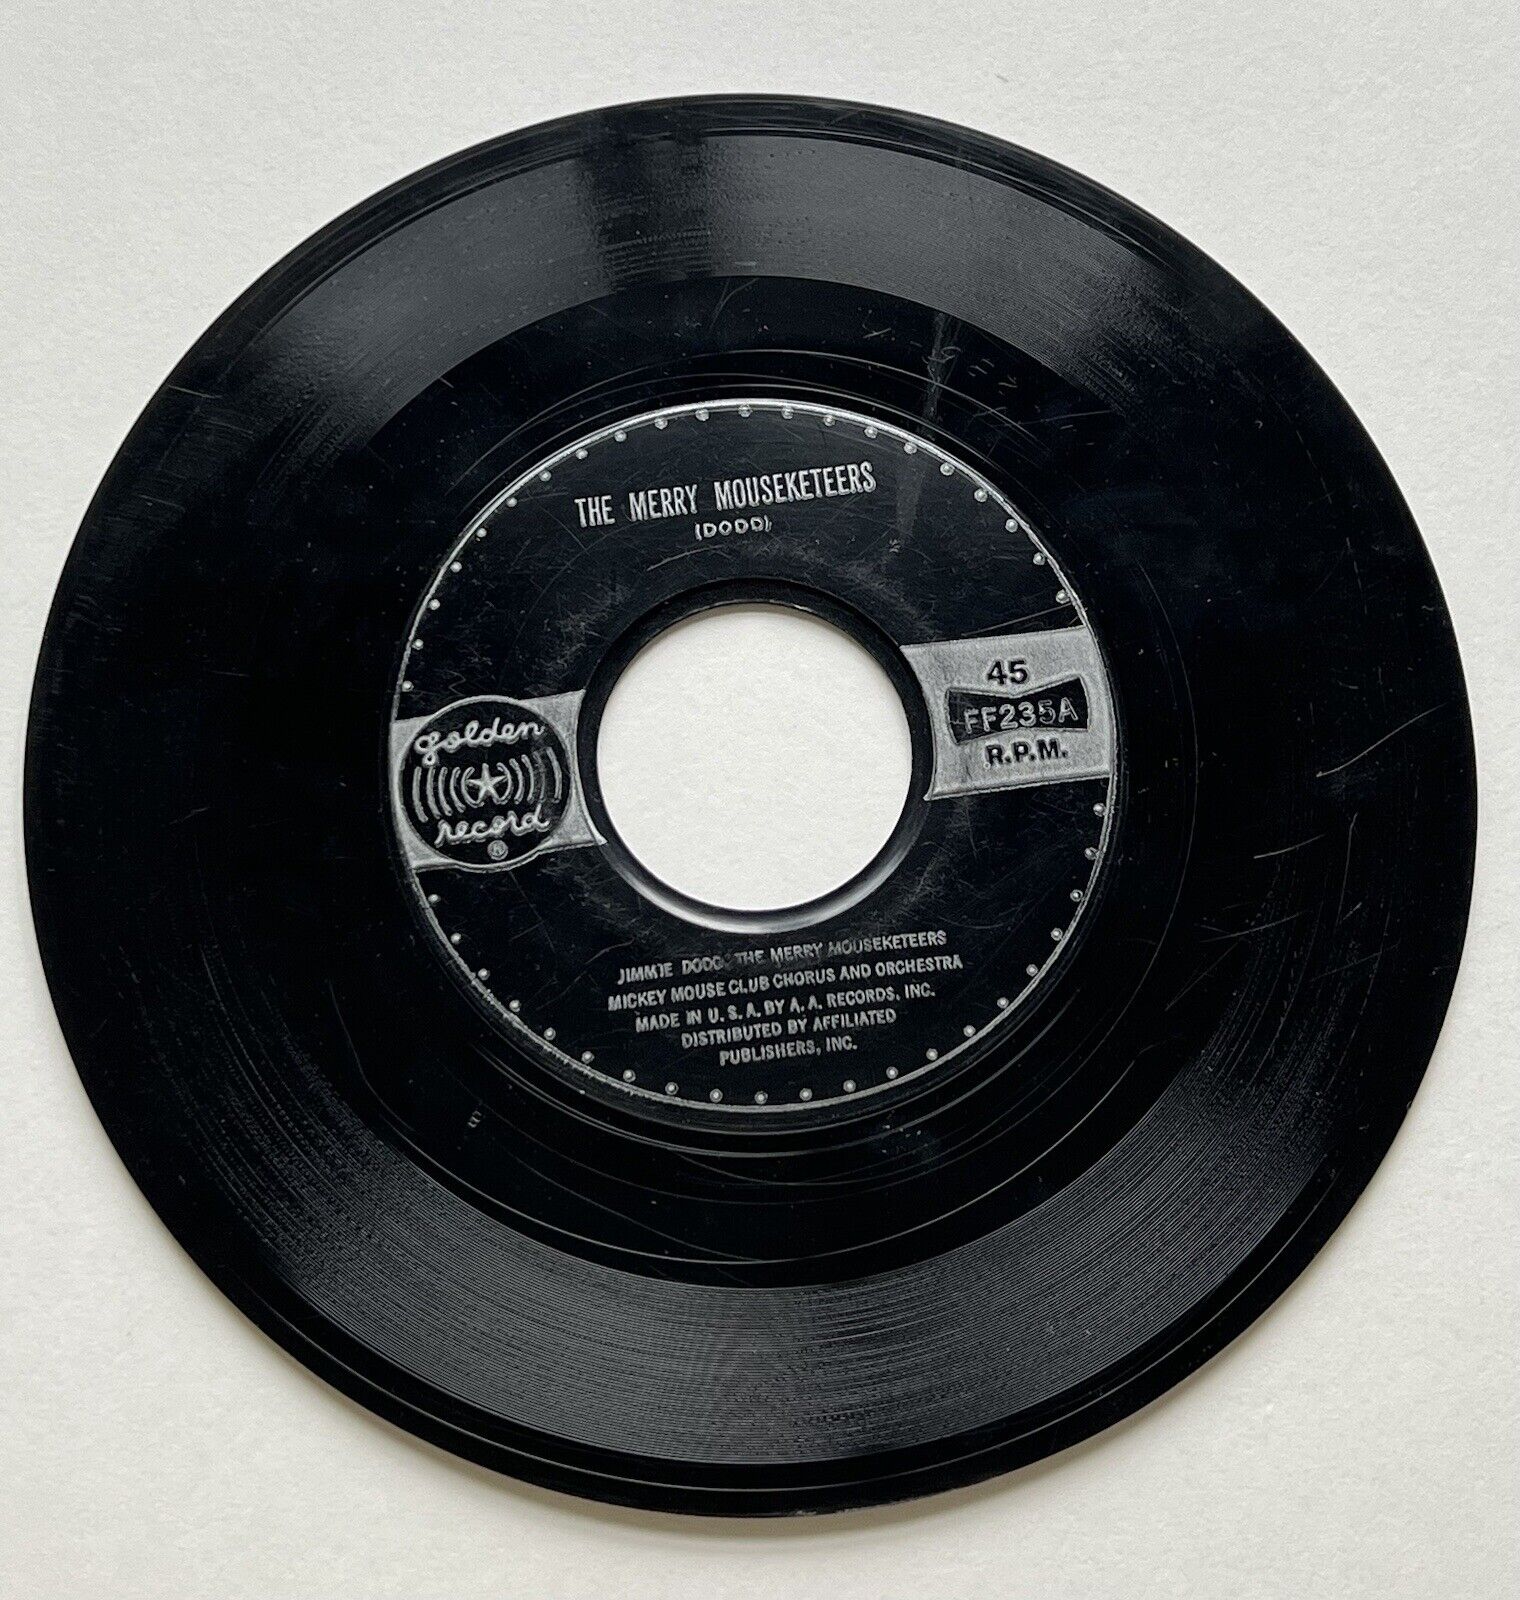 The Merry Mouseketeers and Talent Round Up | Golden Record 45 RPM